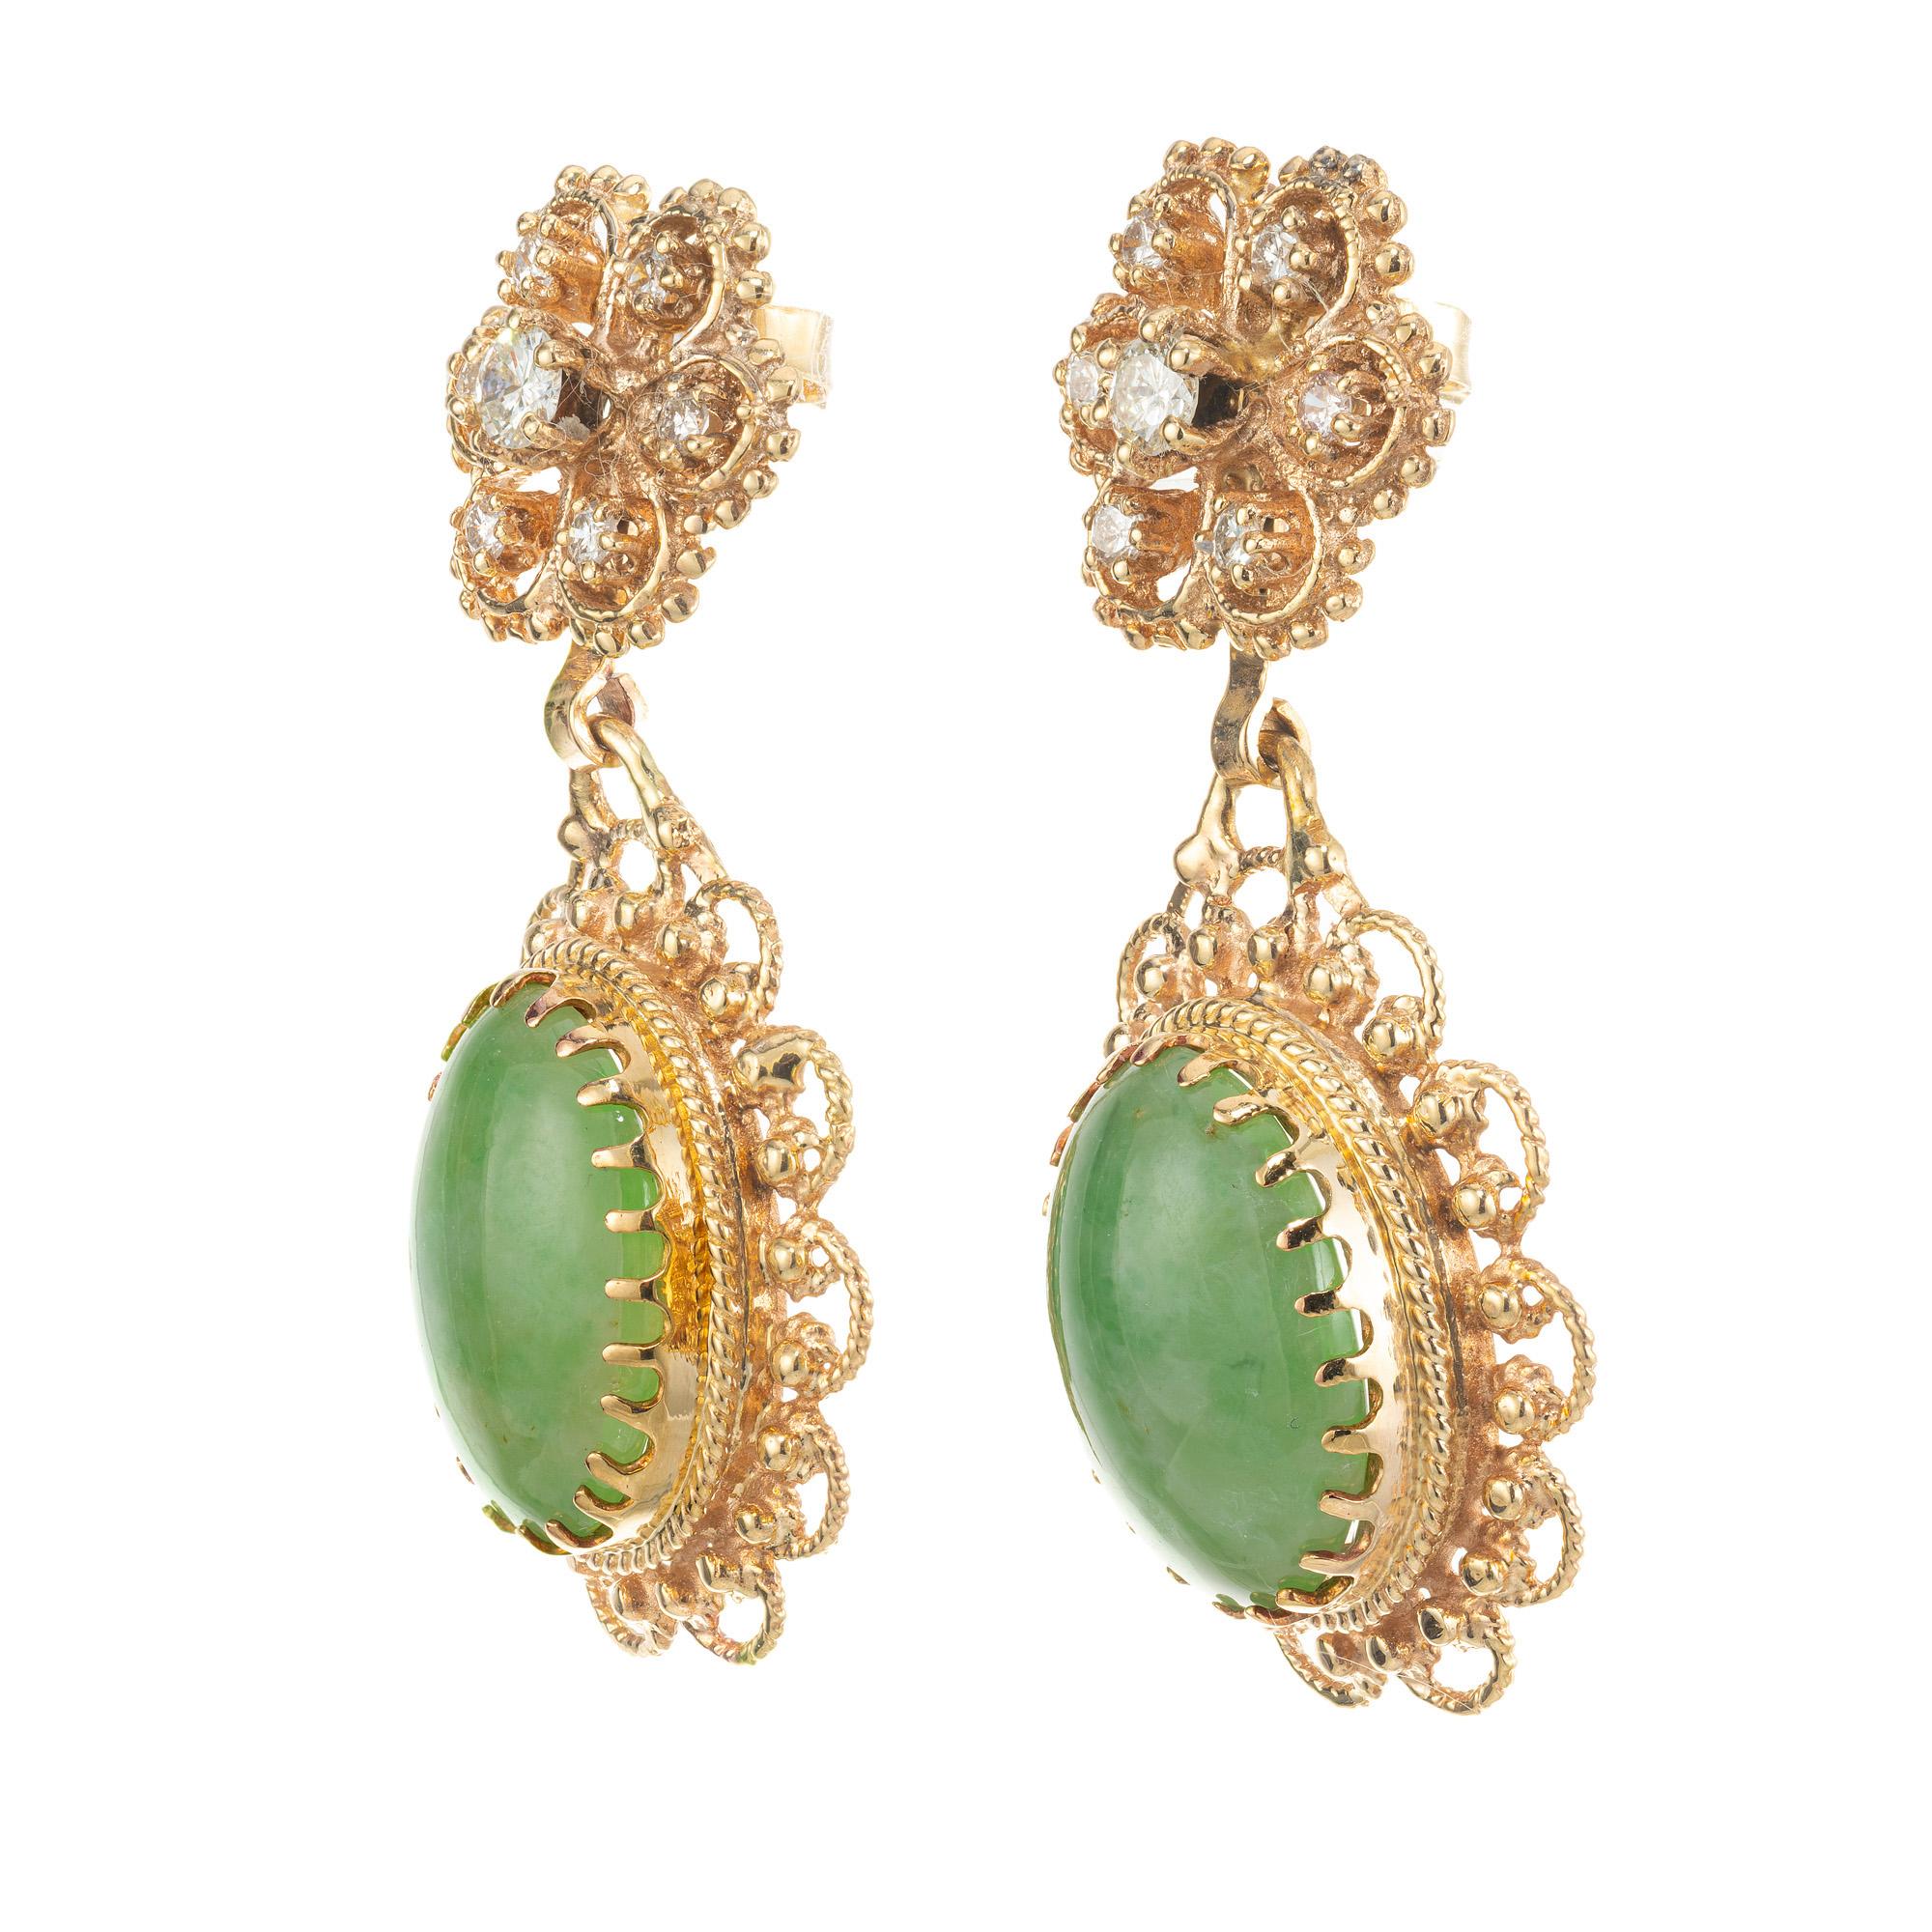 Natural untreated 1950's jadeite jade and diamond earrings. These spectacular mid-century earrings begin with 2 oval cabochon jade gemstones with a total carat weight of 13.20cts. which are set in 14k yellow gold. Each jade dangle is accented by 7